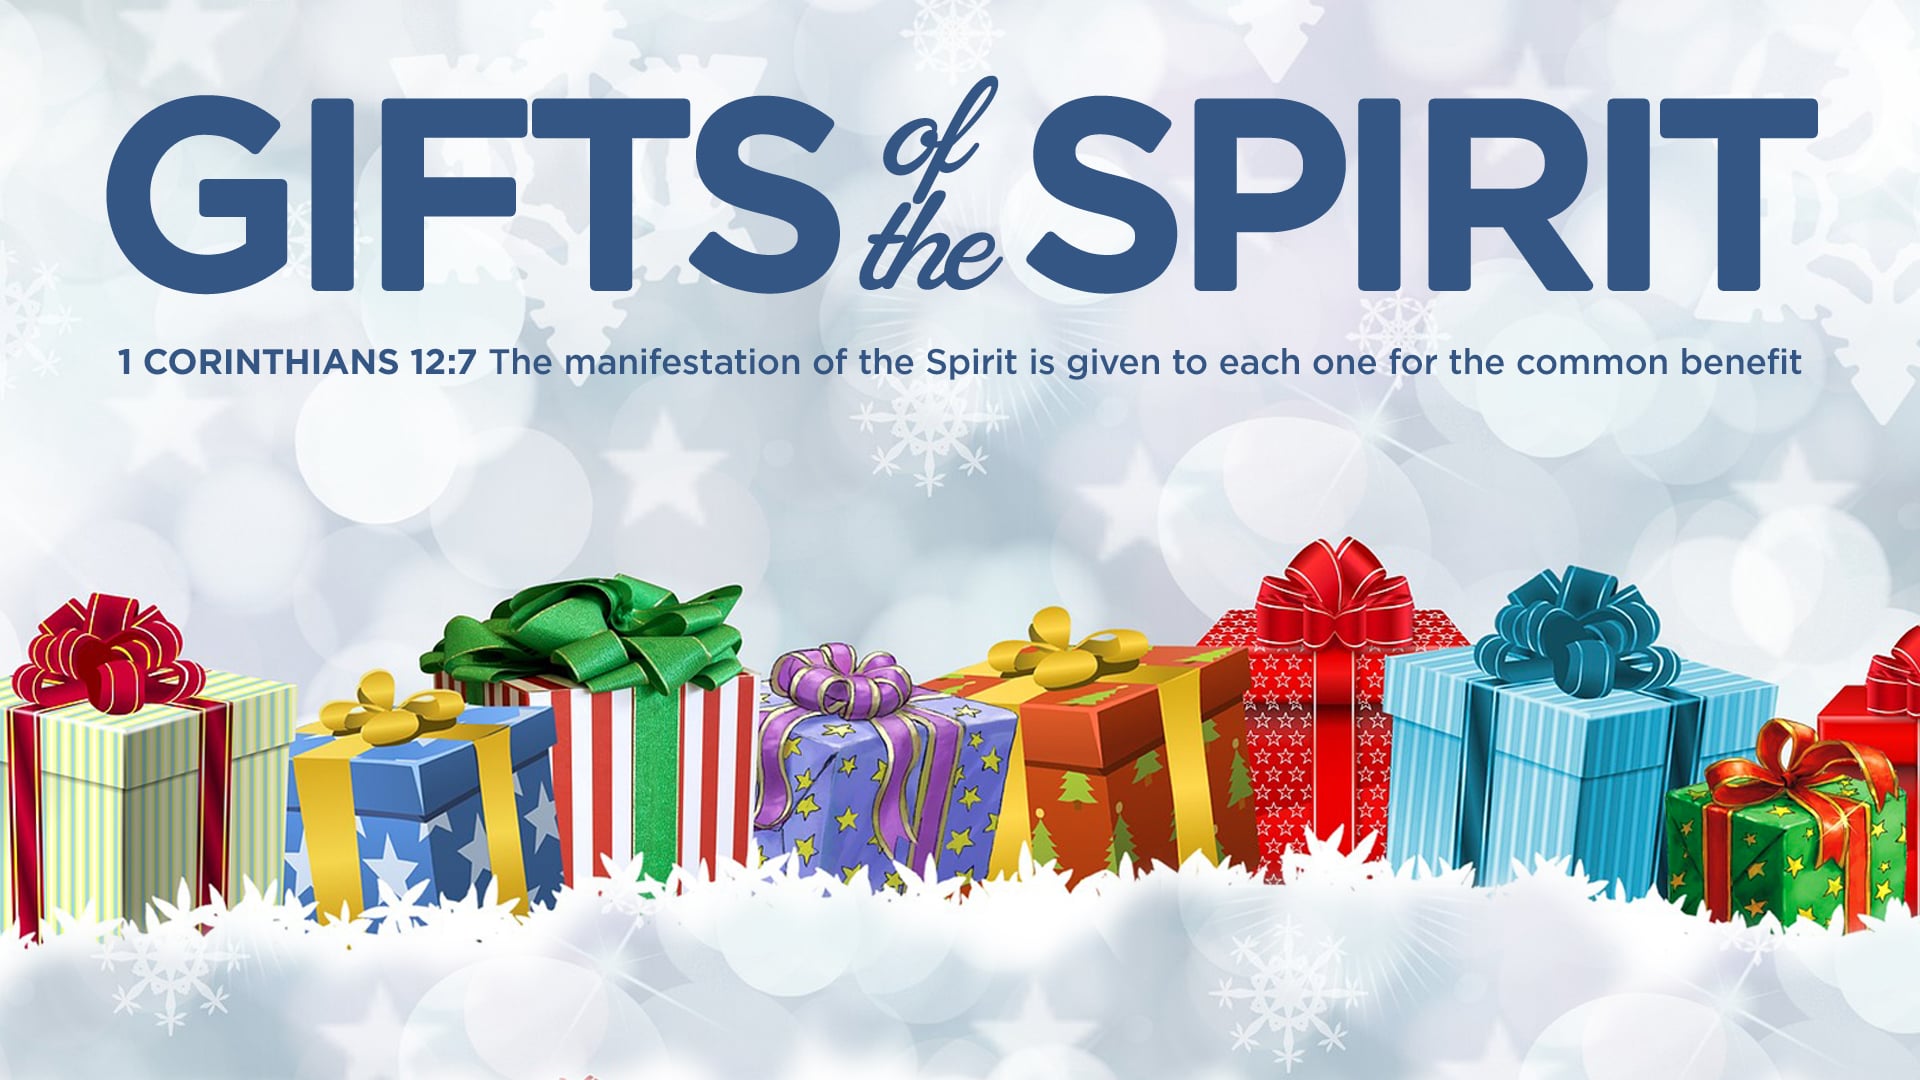 Gifts of the Spirit 2: Power